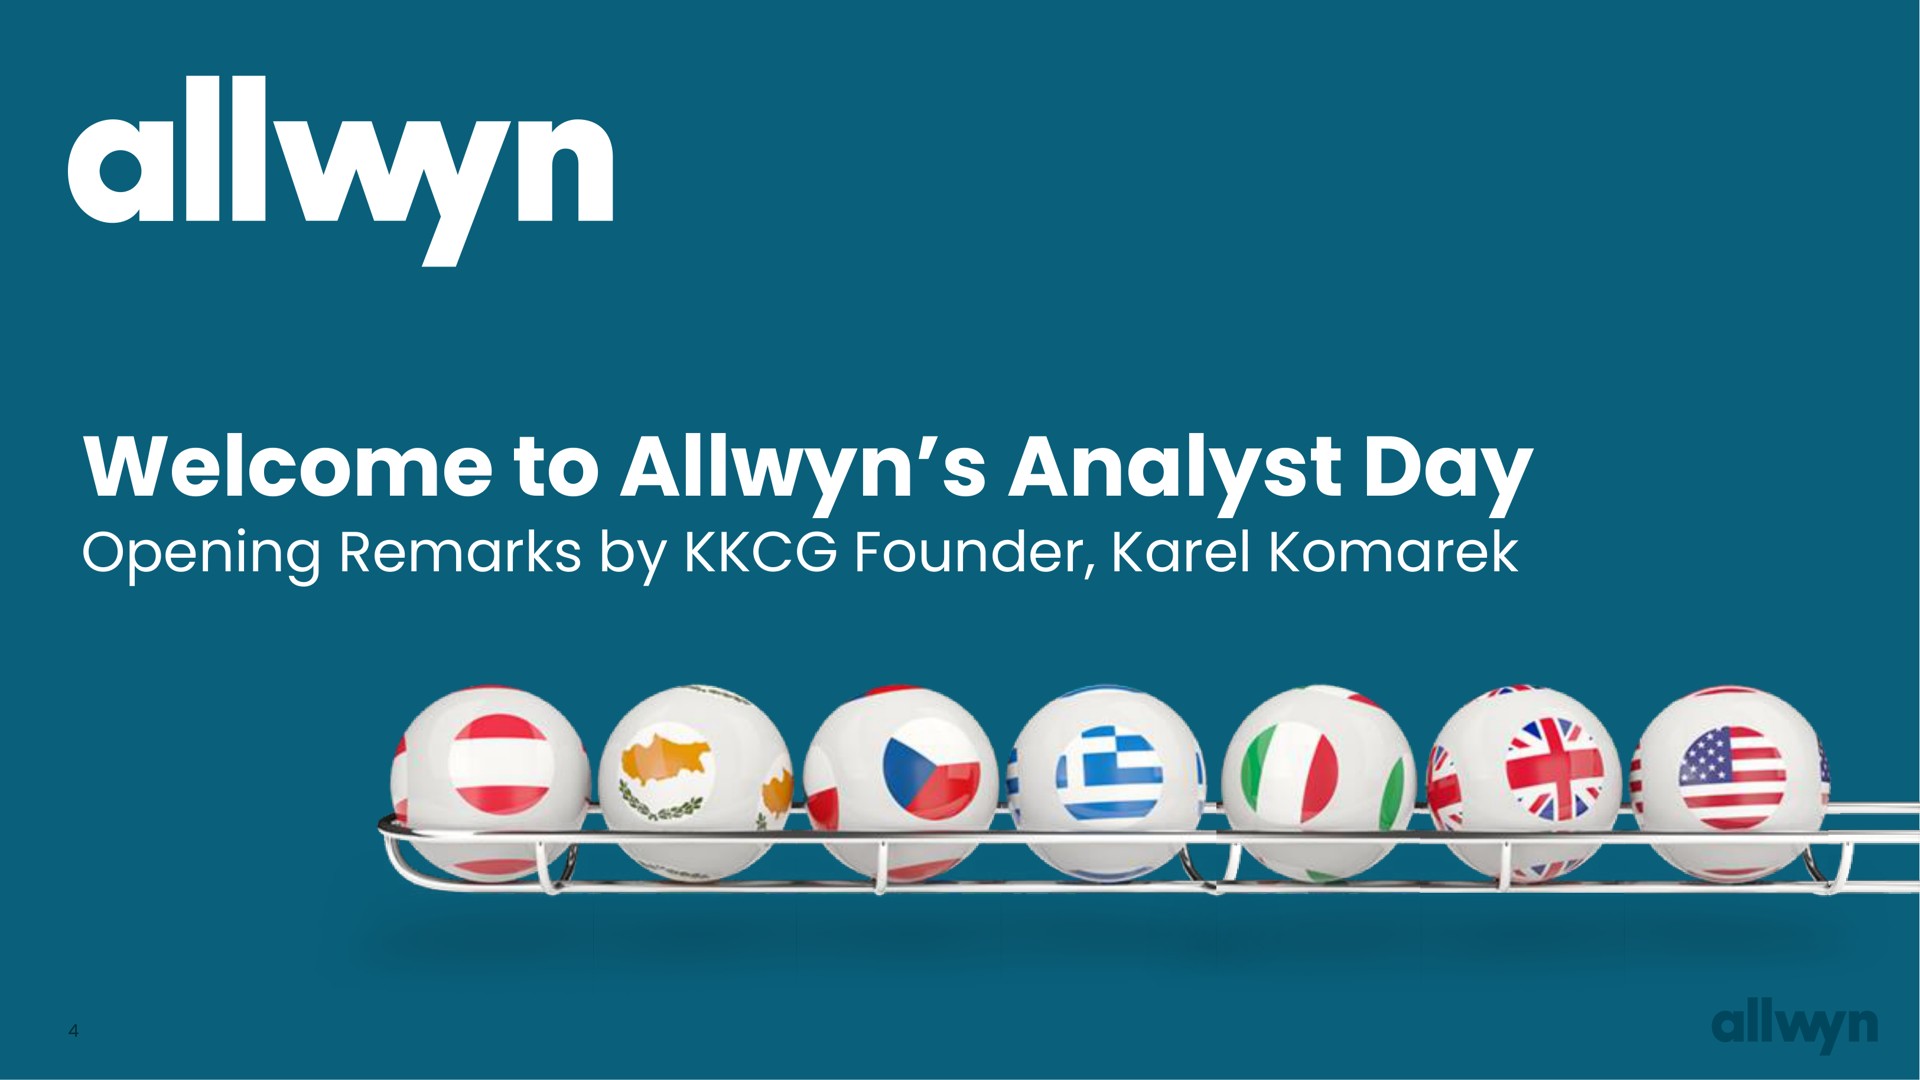 welcome to analyst day opening remarks by founder | Allwyn